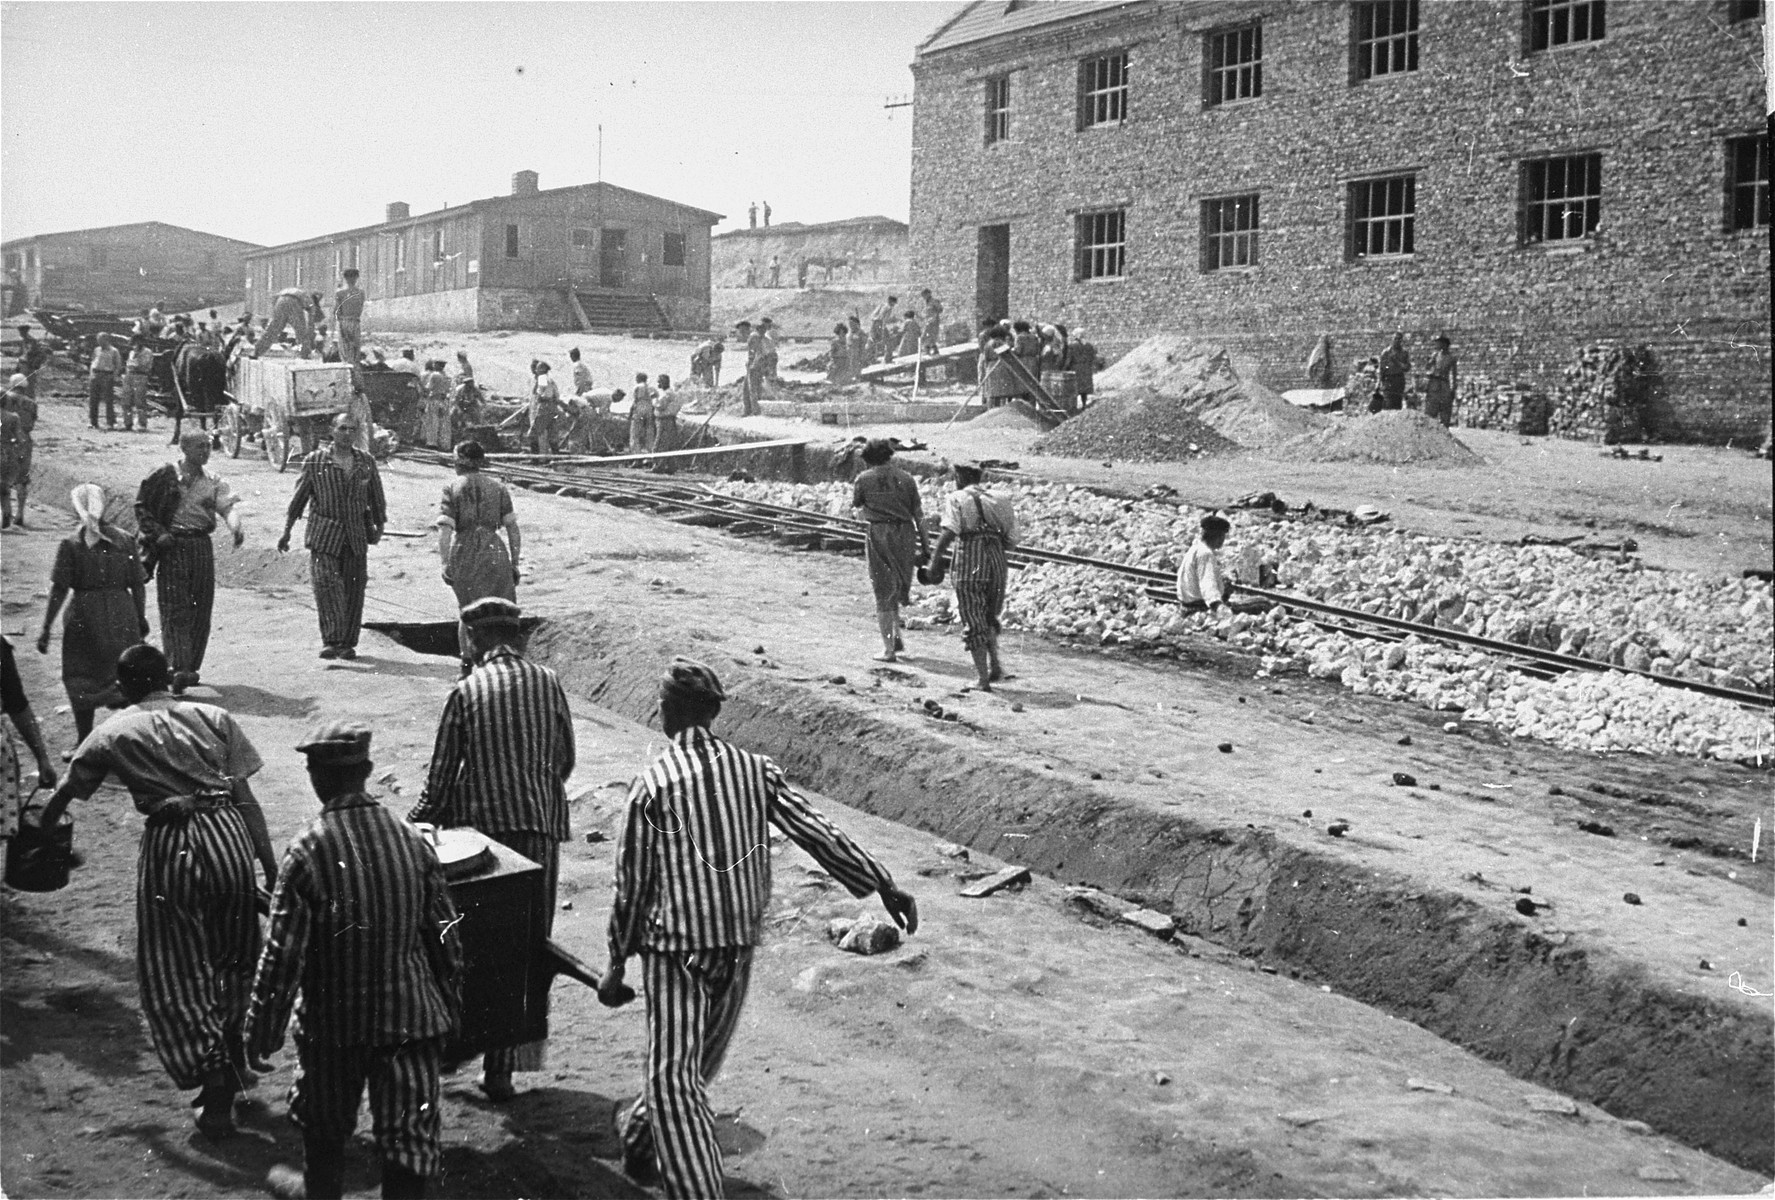 Four prisoners in the foreground carry a food container to others at forced labor.